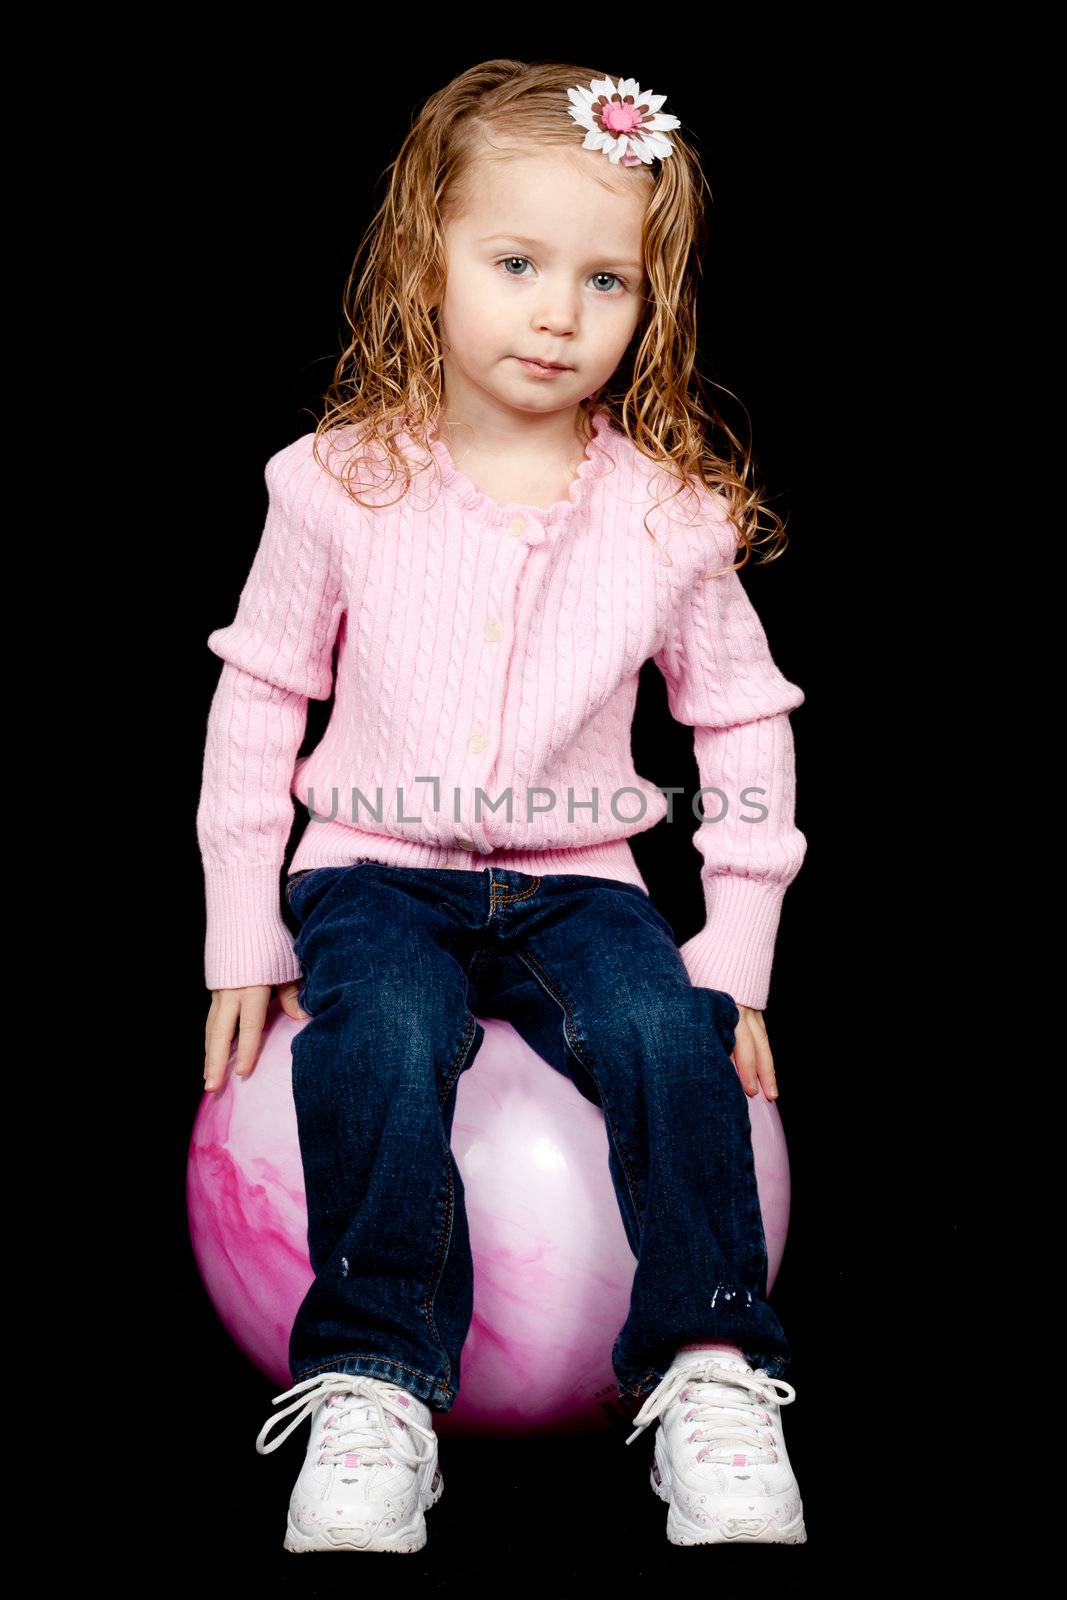 A lone content child sitting on her pink rubber ball.